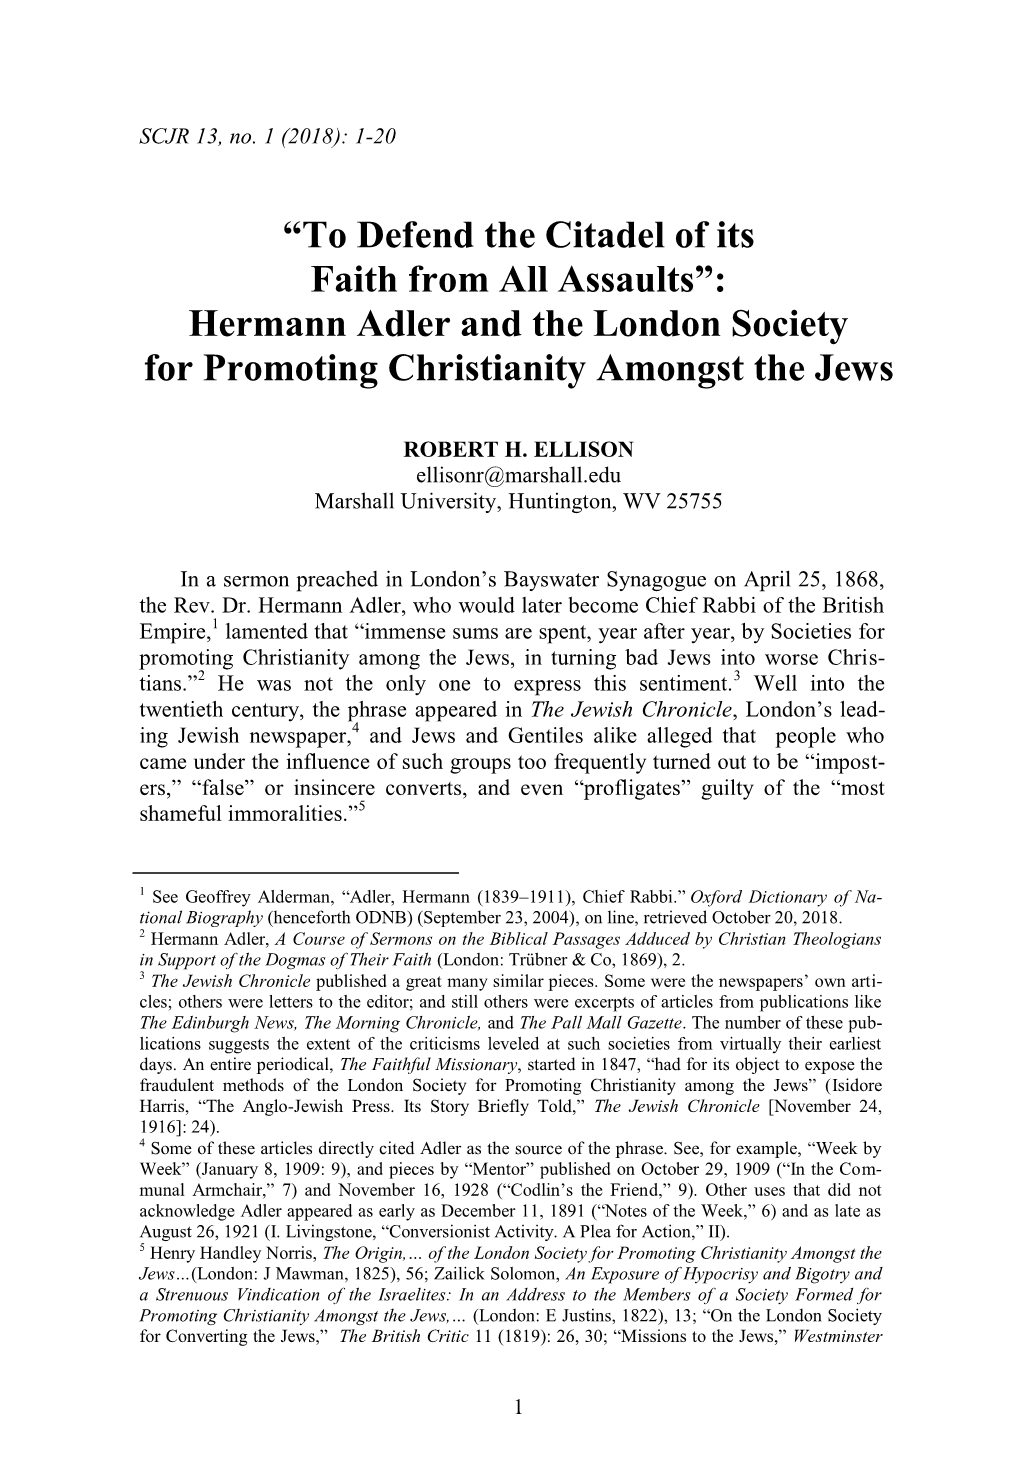 Hermann Adler and the London Society for Promoting Christianity Amongst the Jews